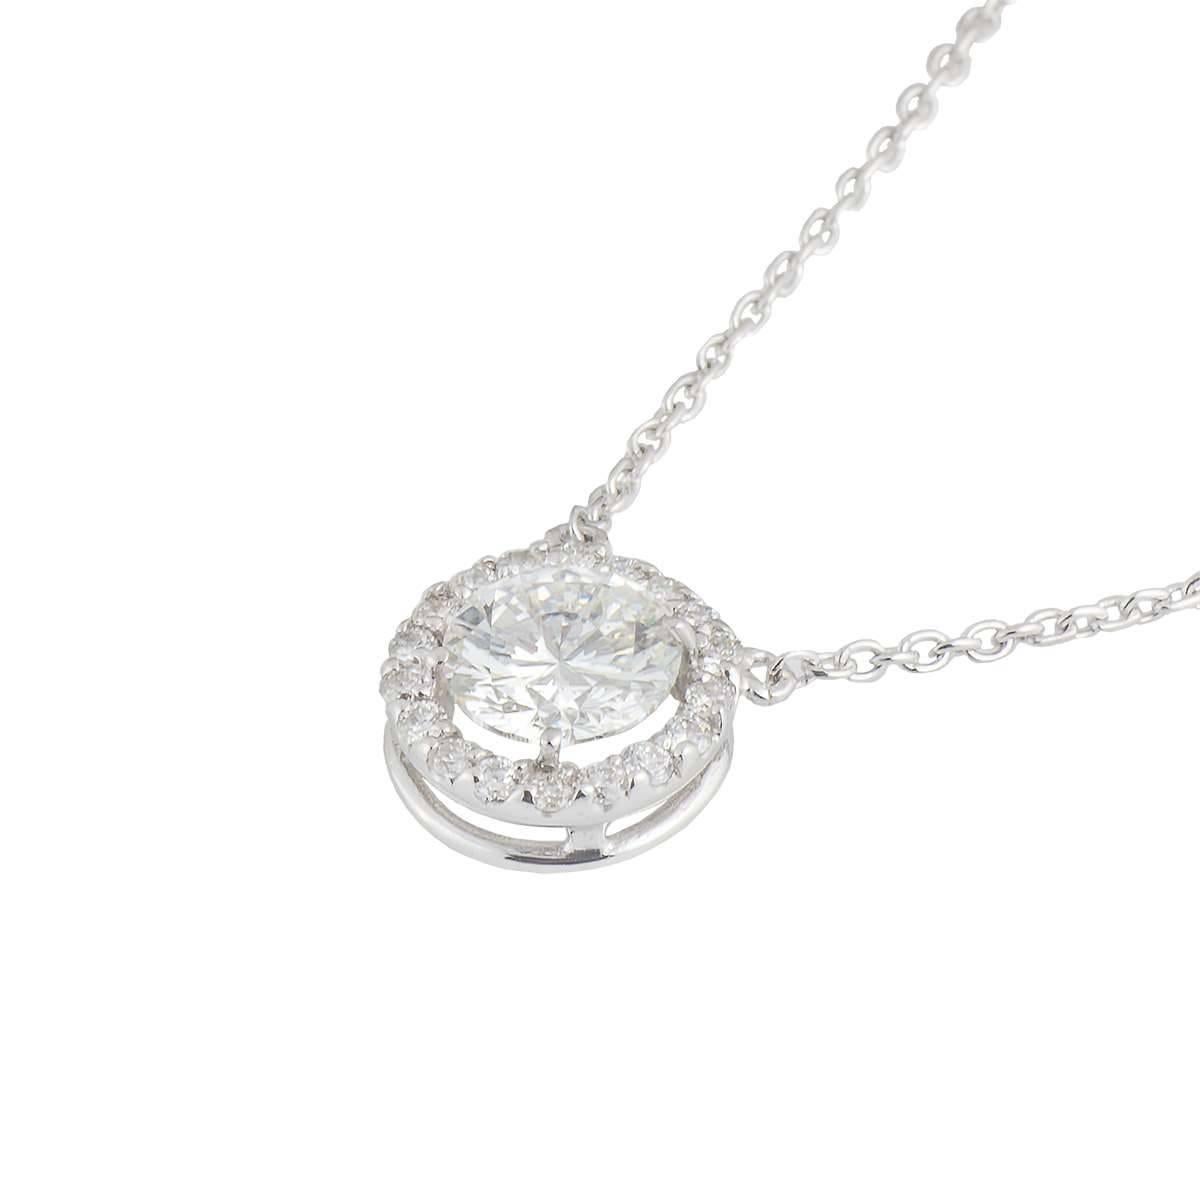 An 18k white gold round brilliant cut diamond pendant. The pendant is set to the centre with a round brilliant cut diamond weighing approximately 0.70ct, G colour and VS in clarity. Complementing the central stone is a halo of 18 round brilliant cut